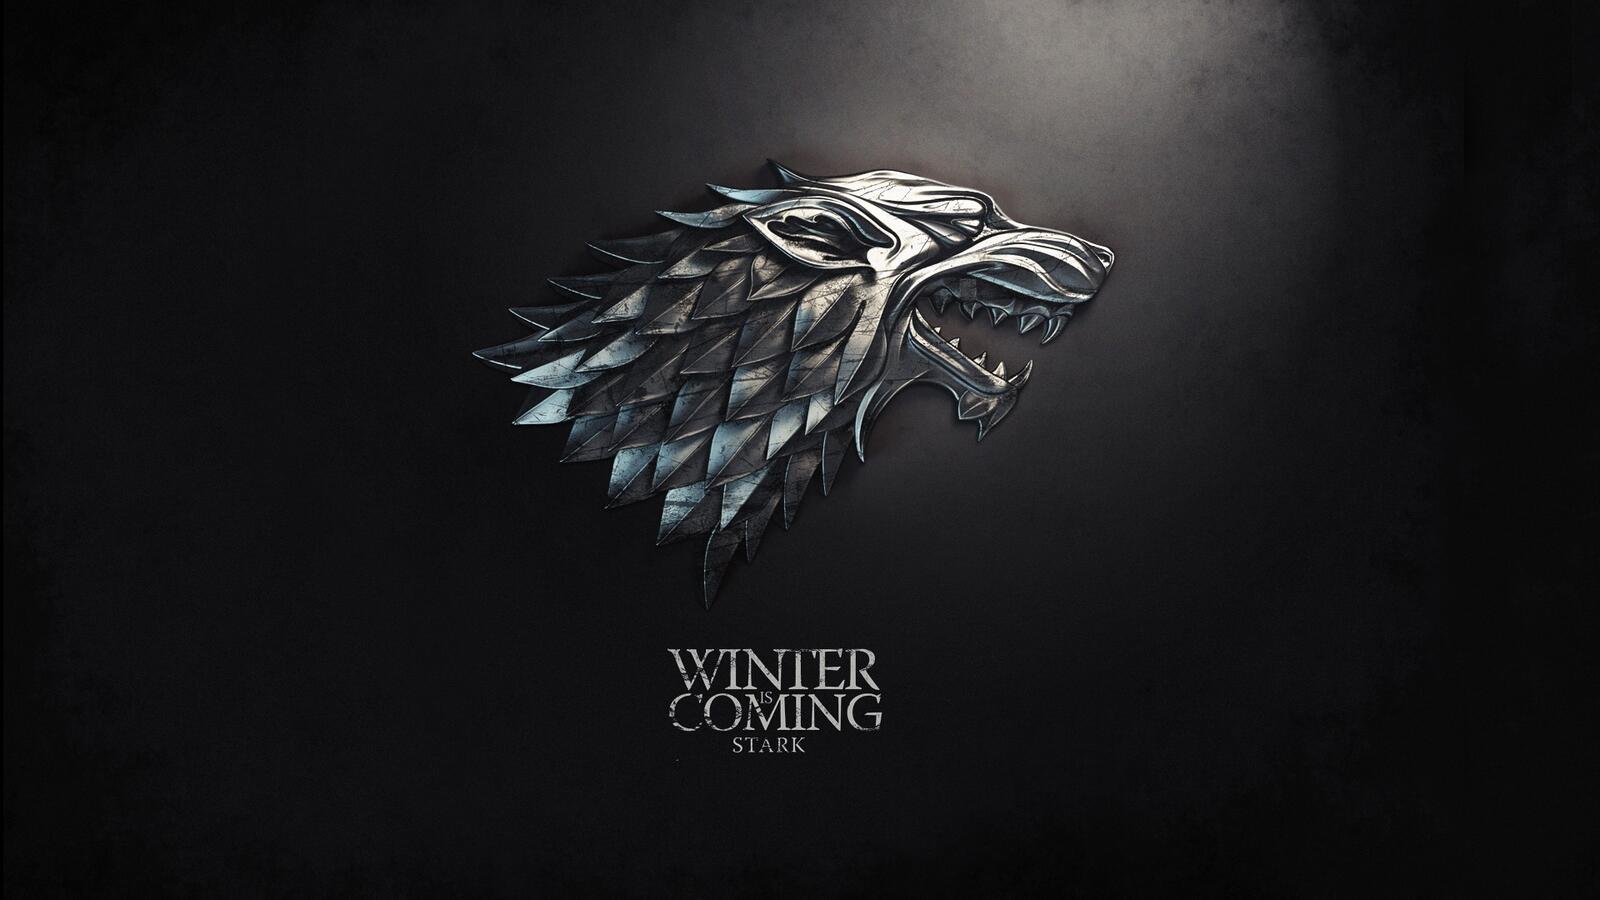 Wallpapers Game Of Thrones TV show black background on the desktop